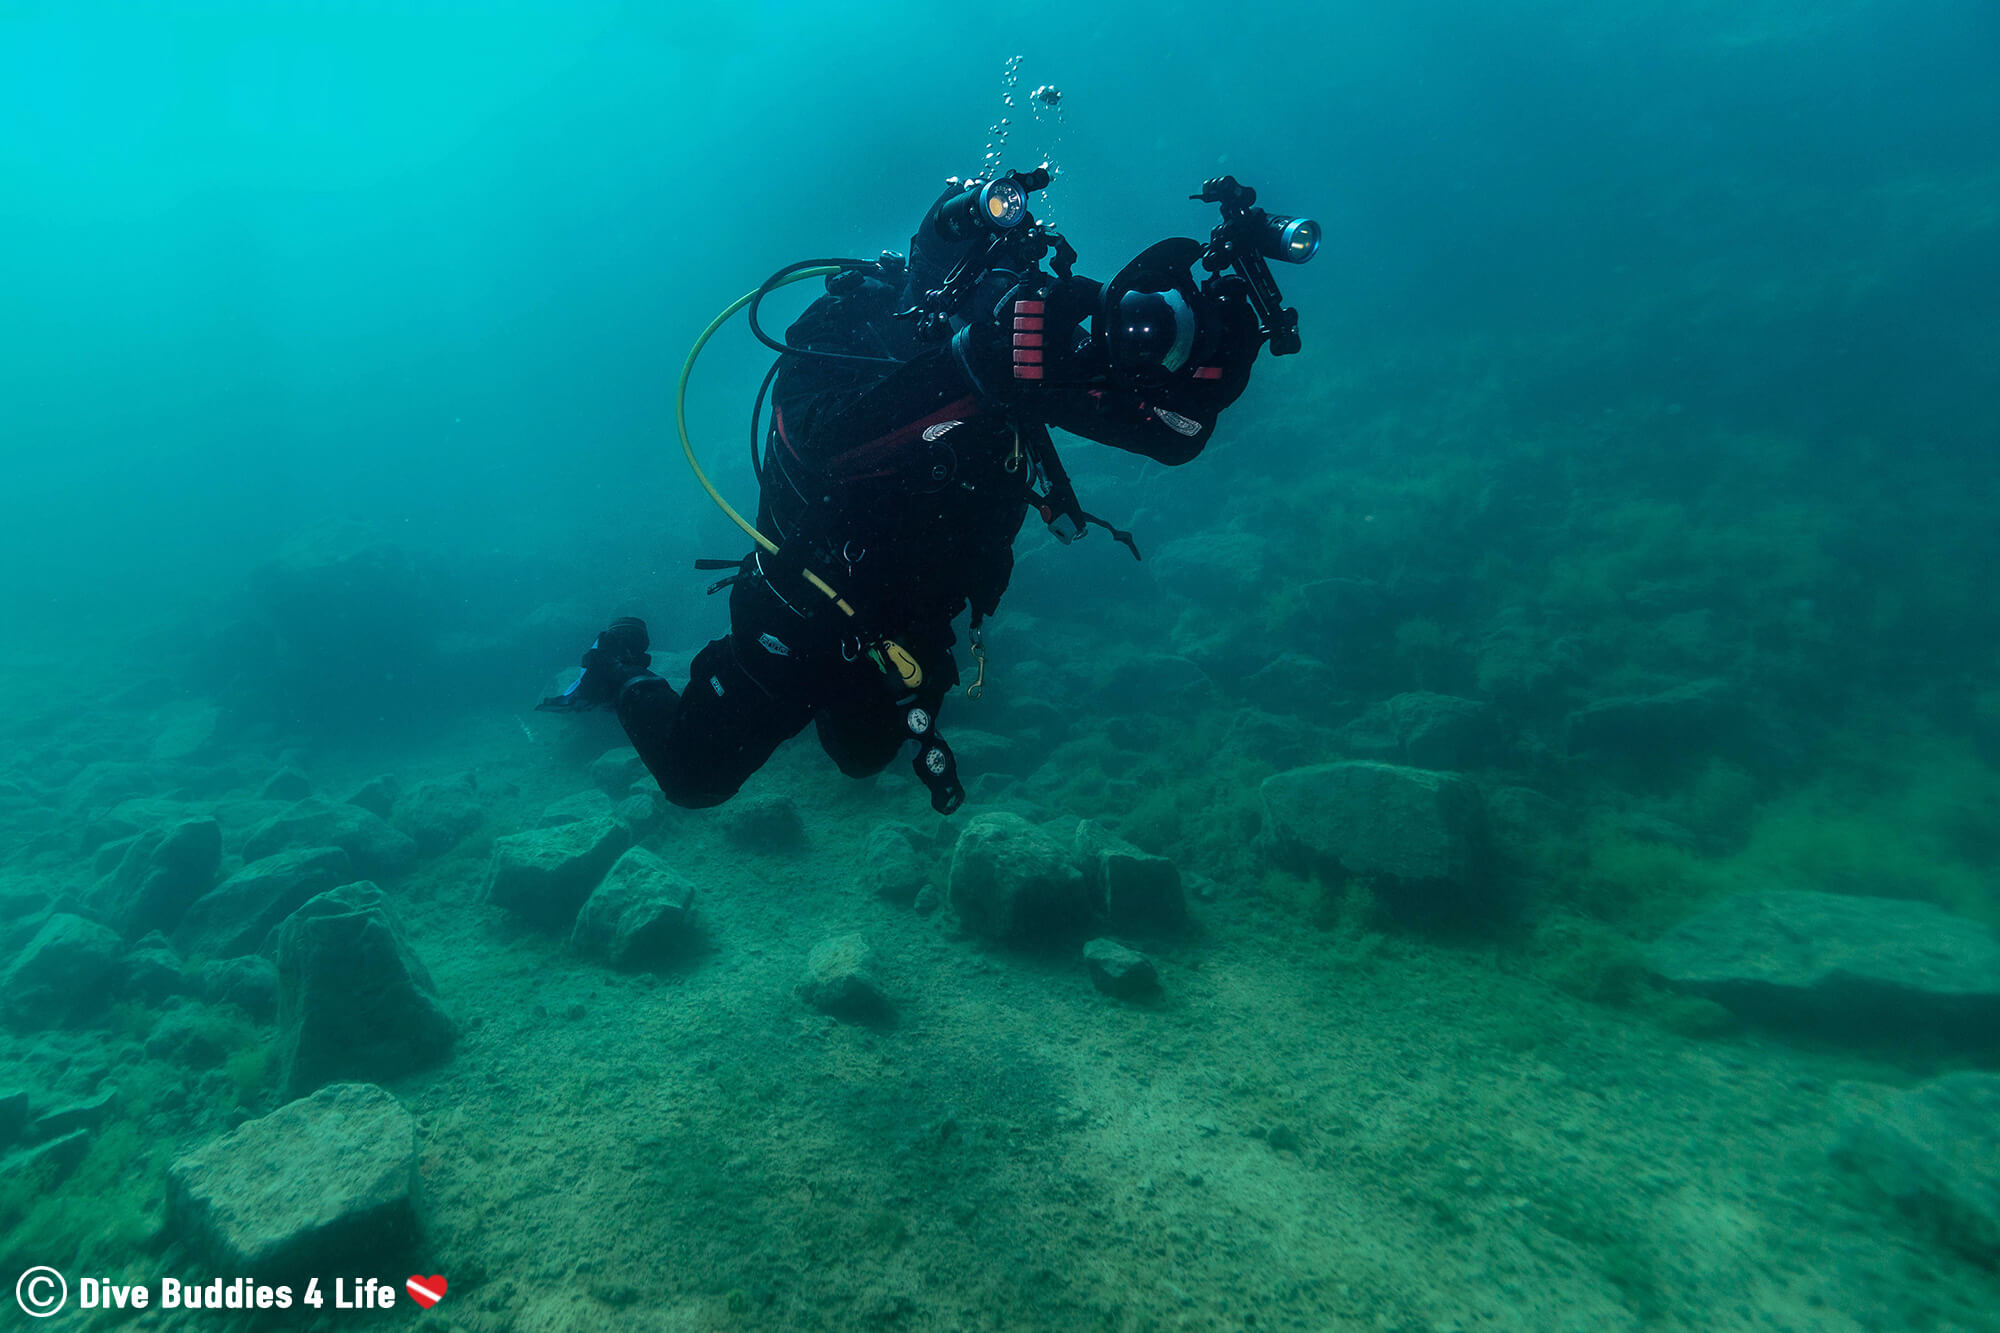 Joey Filming Some Scuba Diving Action On His GoPro Dome Port Camera In Chepstow, Wales, UK